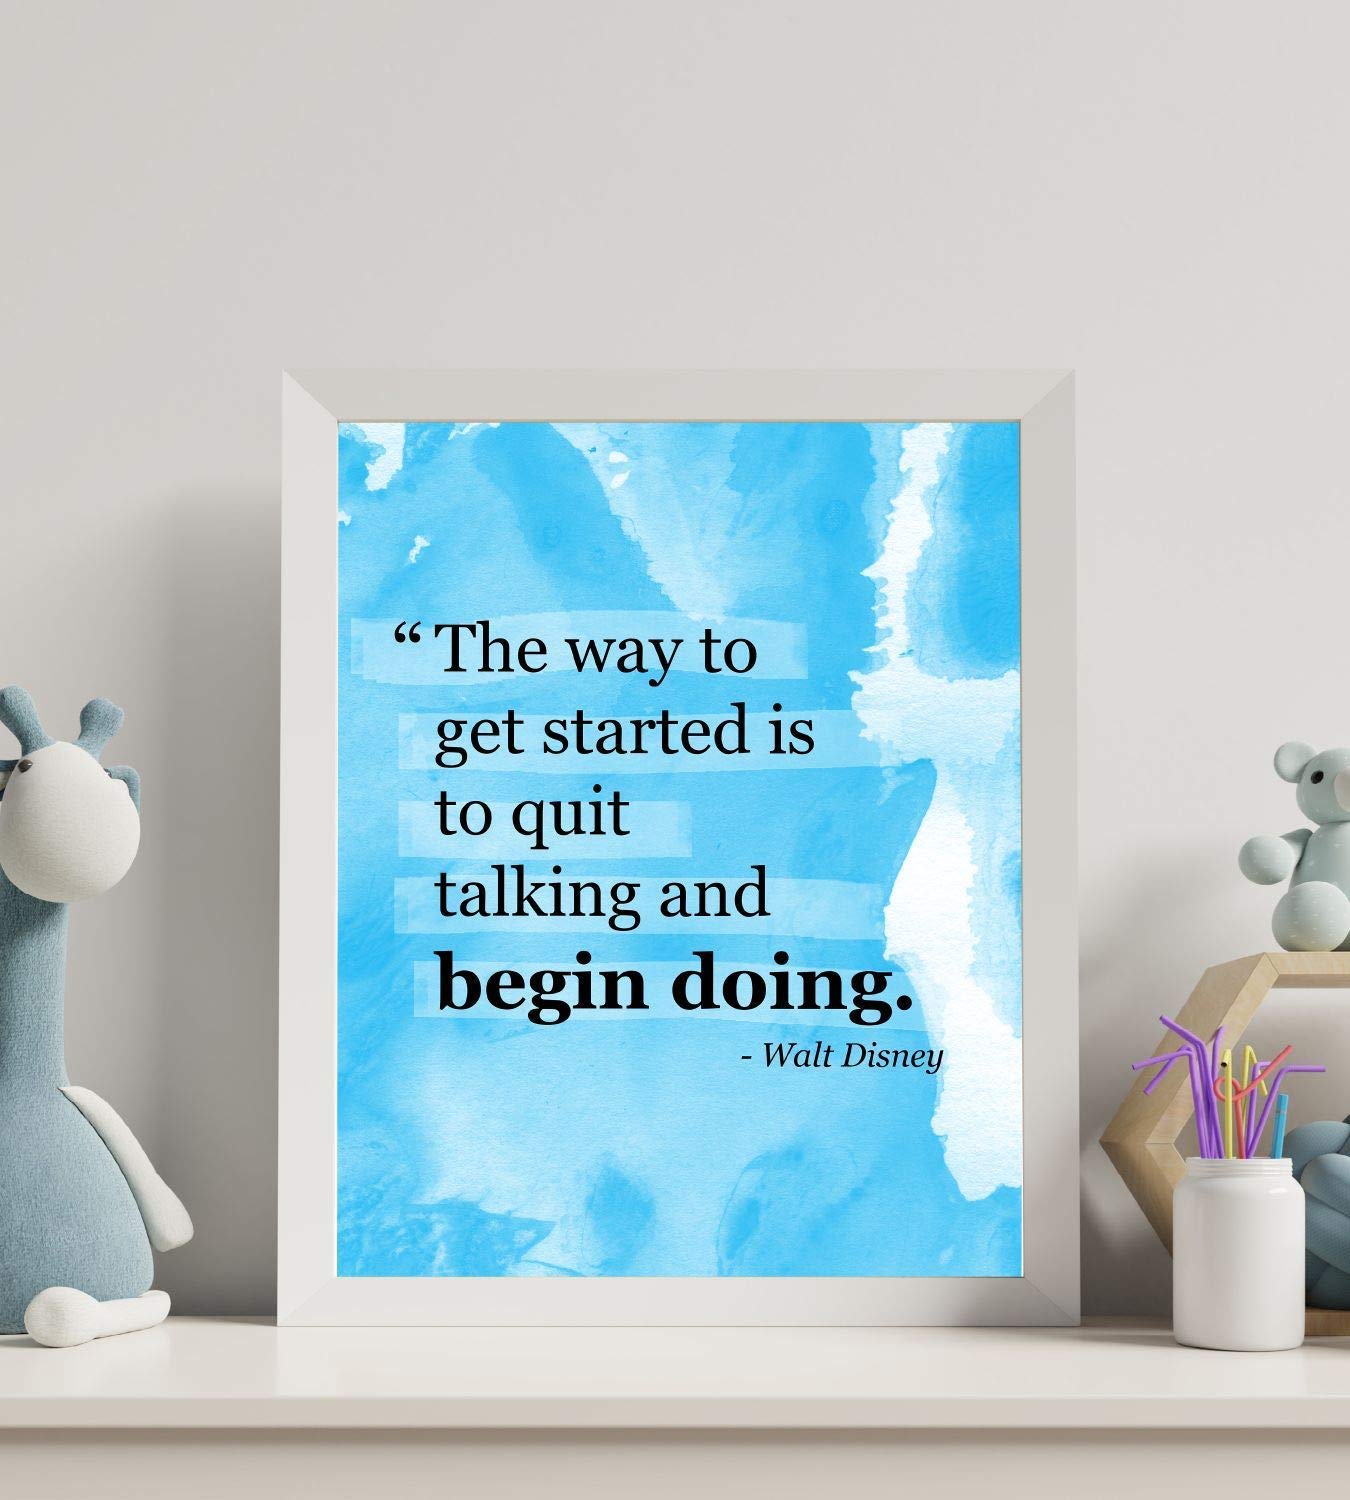 Walt Disney Quotes Wall Art- ?Get Started By Quit Talking & Begin Doing?- 8 x 10" Modern Abstract Art Print- Ready to Frame. Home-Office-Classroom D?cor. Perfect Gift for Motivation & Inspiration!